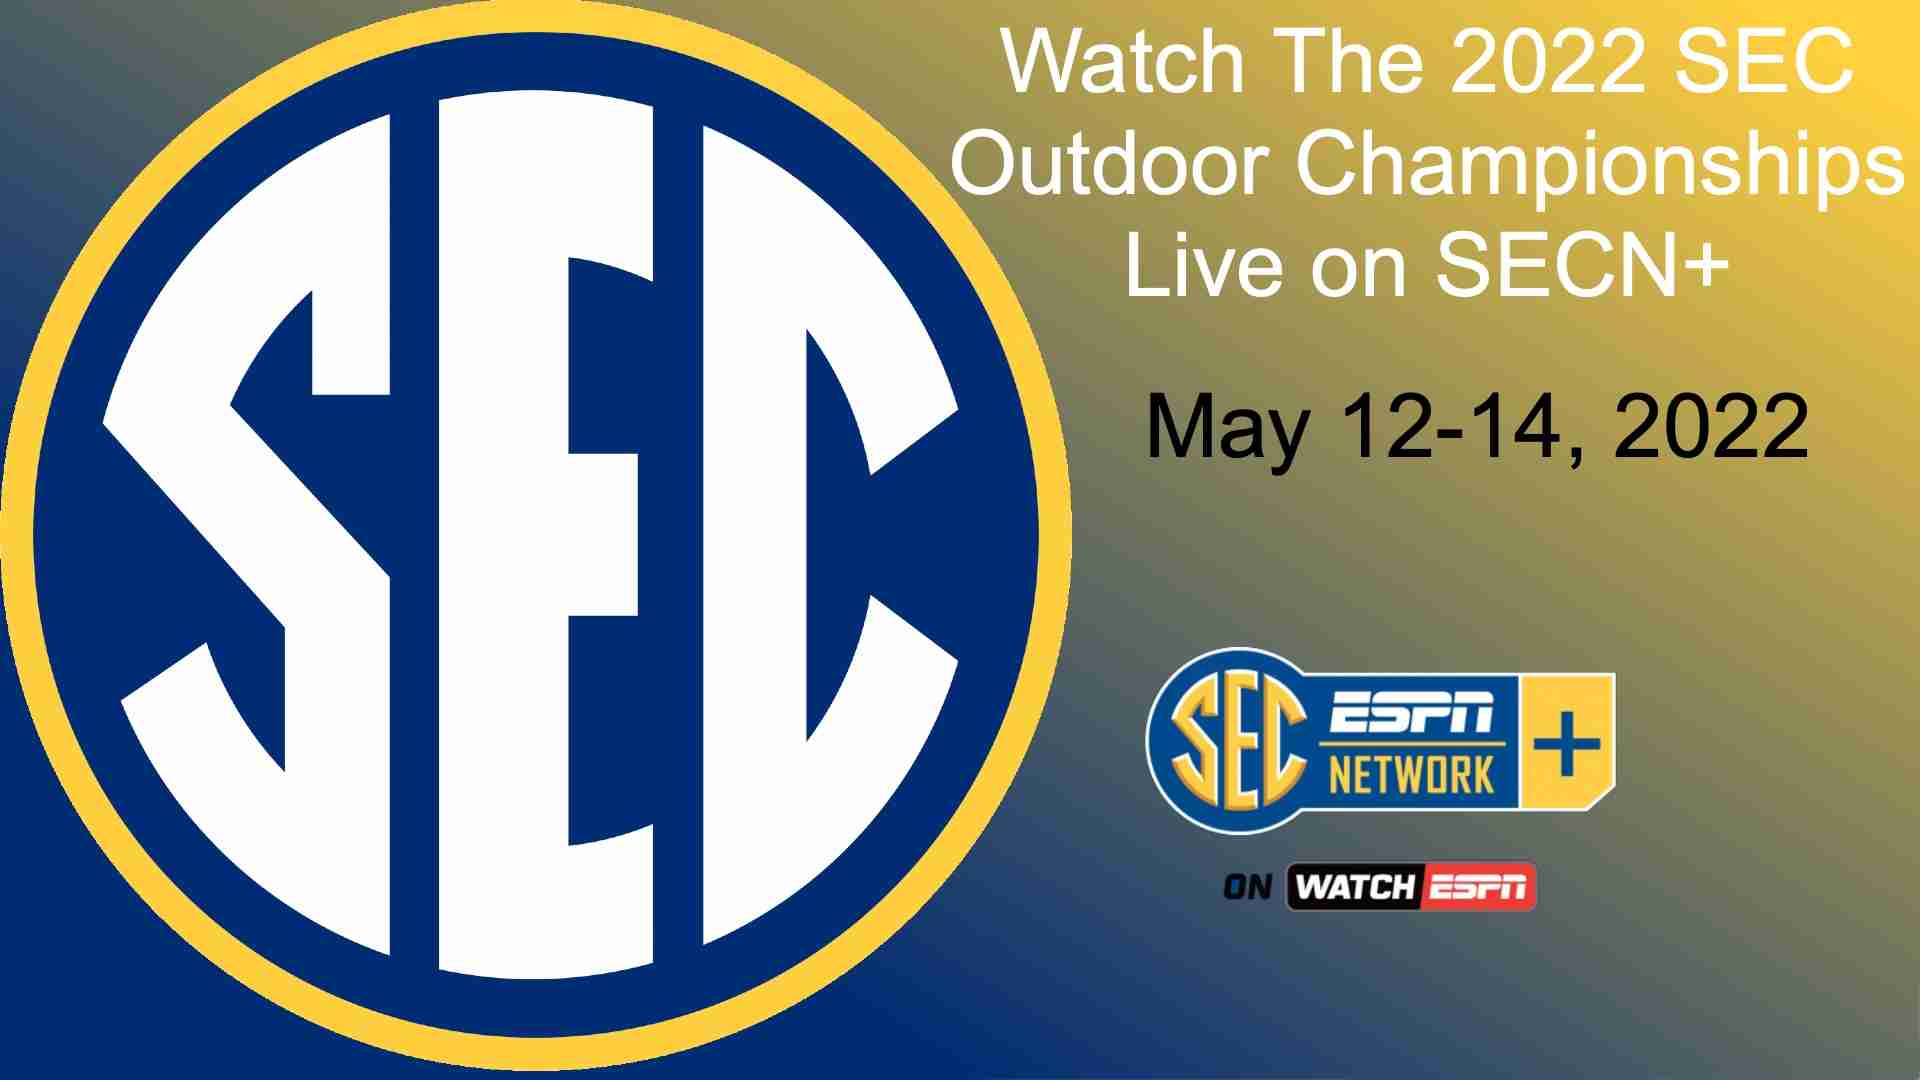 When is the 2022 SEC Outdoor Championships and how to watch it?